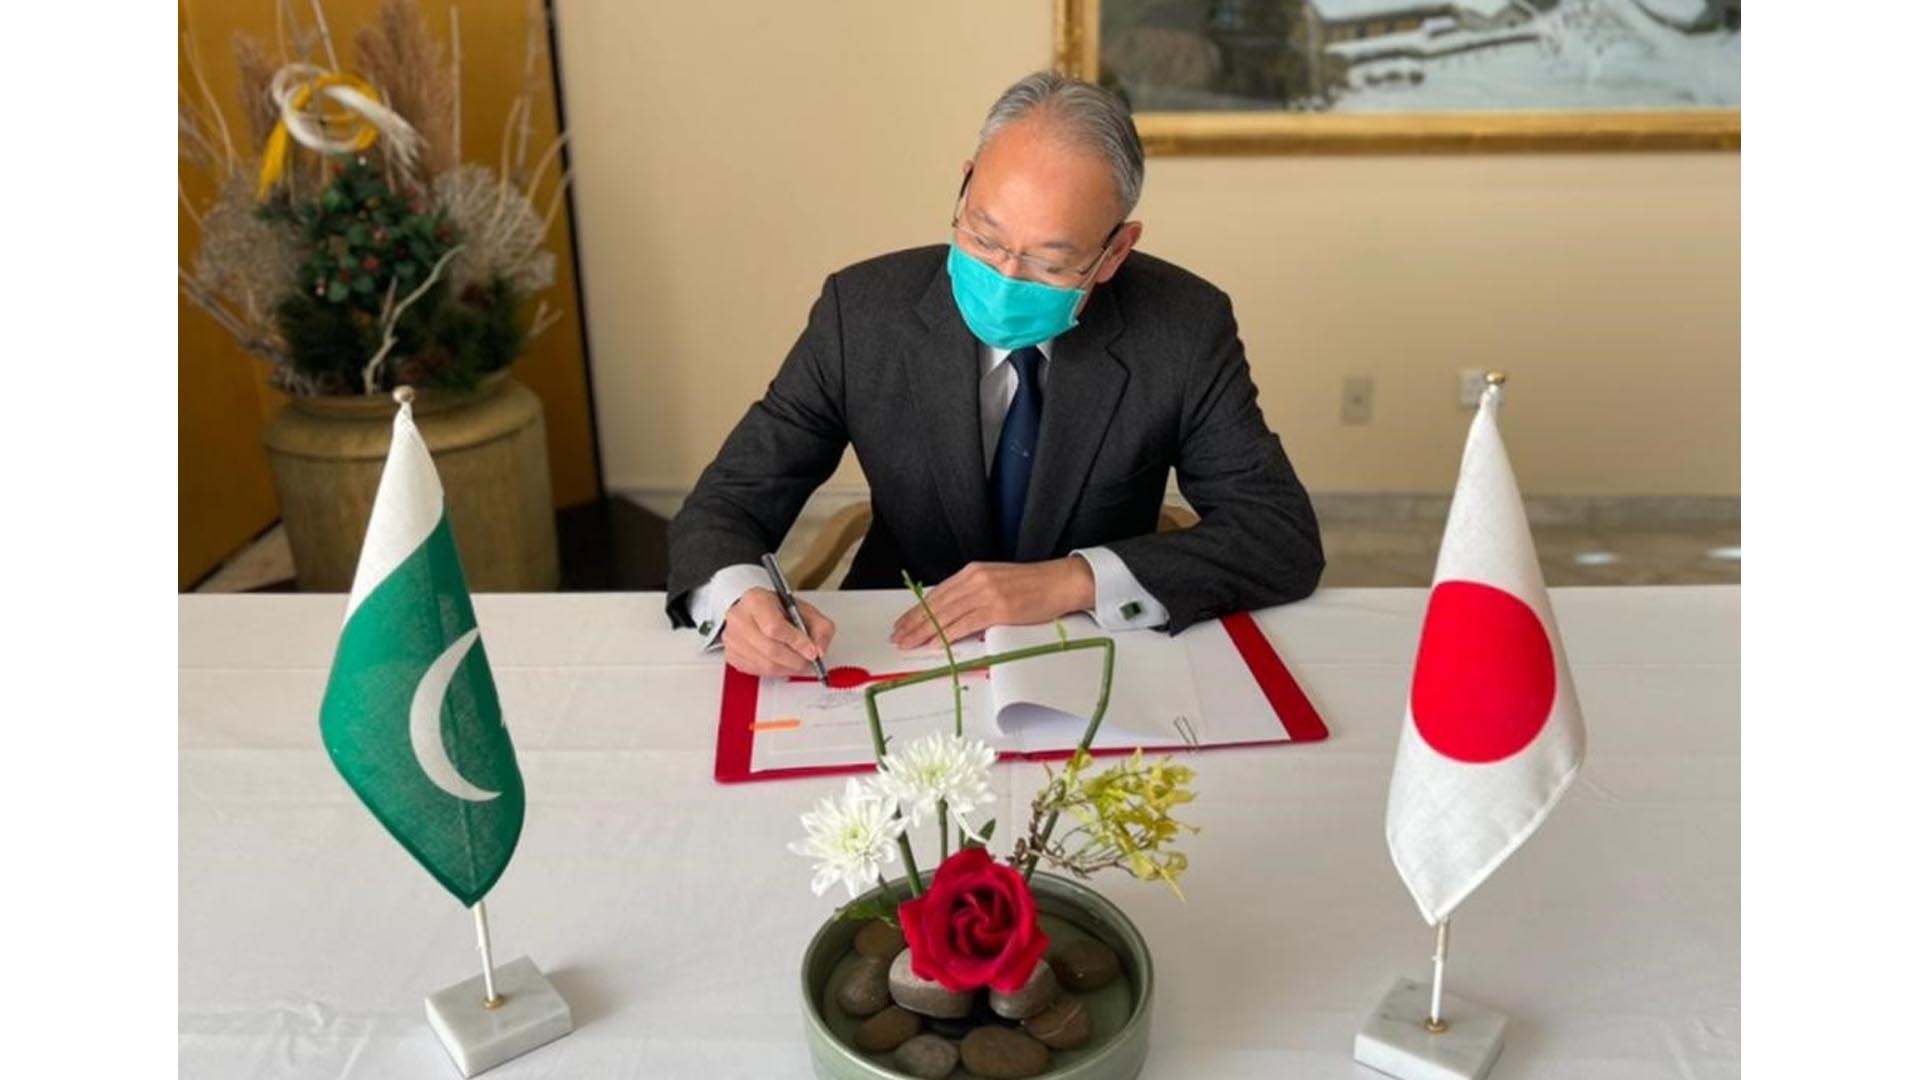 Japan renews commitment to support polio eradication efforts in Pakistan